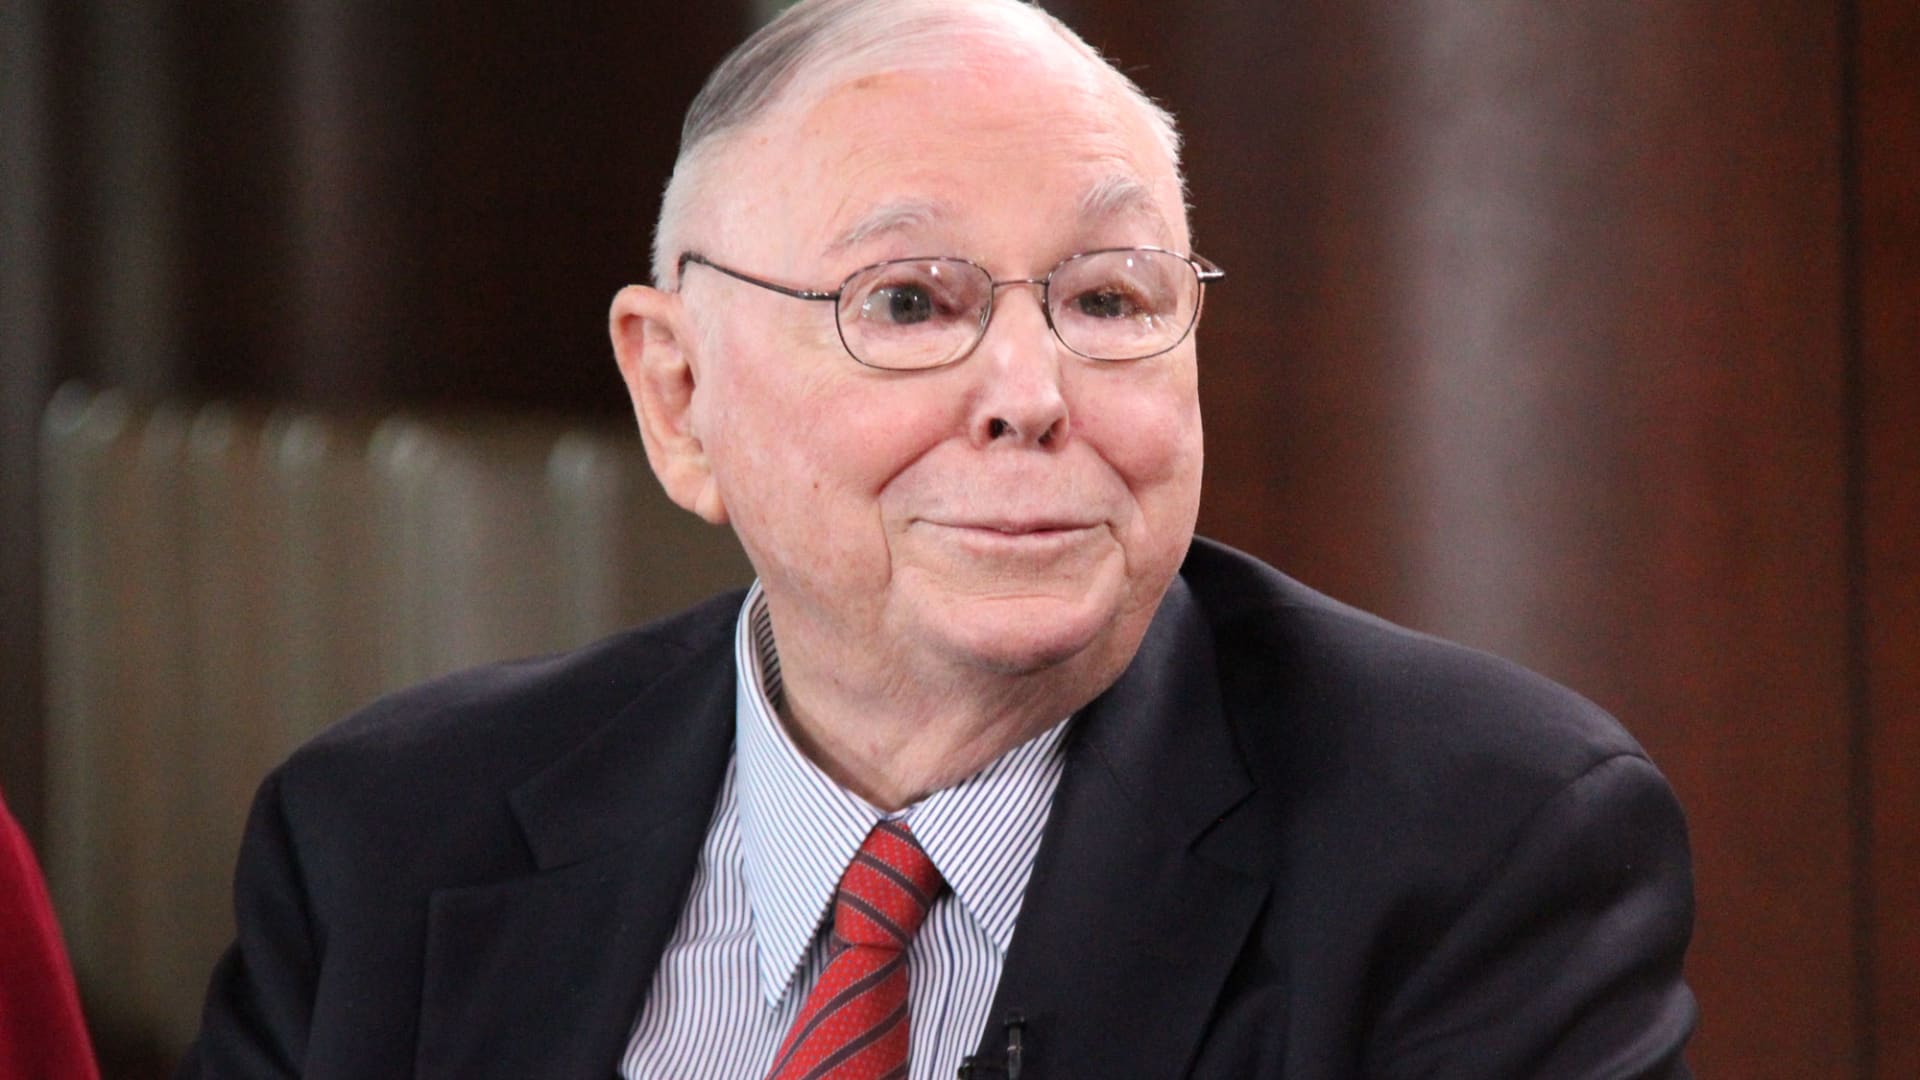 At 99, billionaire Charlie Munger shared his No. 1 tip for living a long, happy life: 'Avoid crazy at all costs' - CNBC